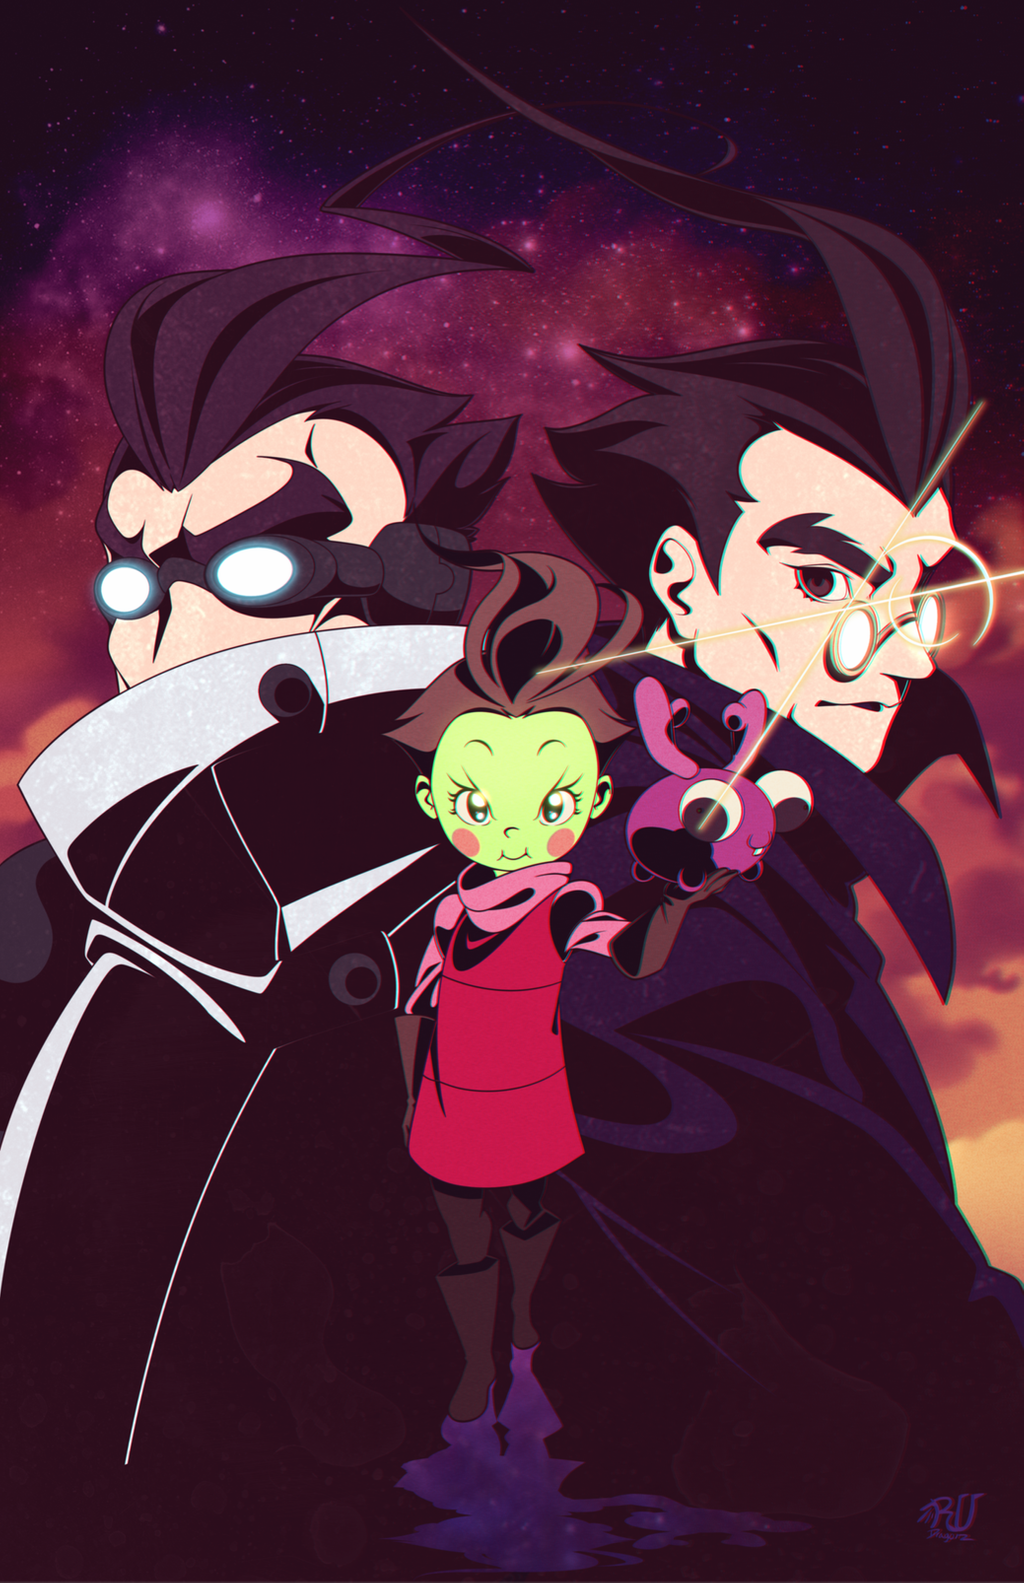 Invader Zim  page 2 of 2  Zerochan Anime Image Board Mobile